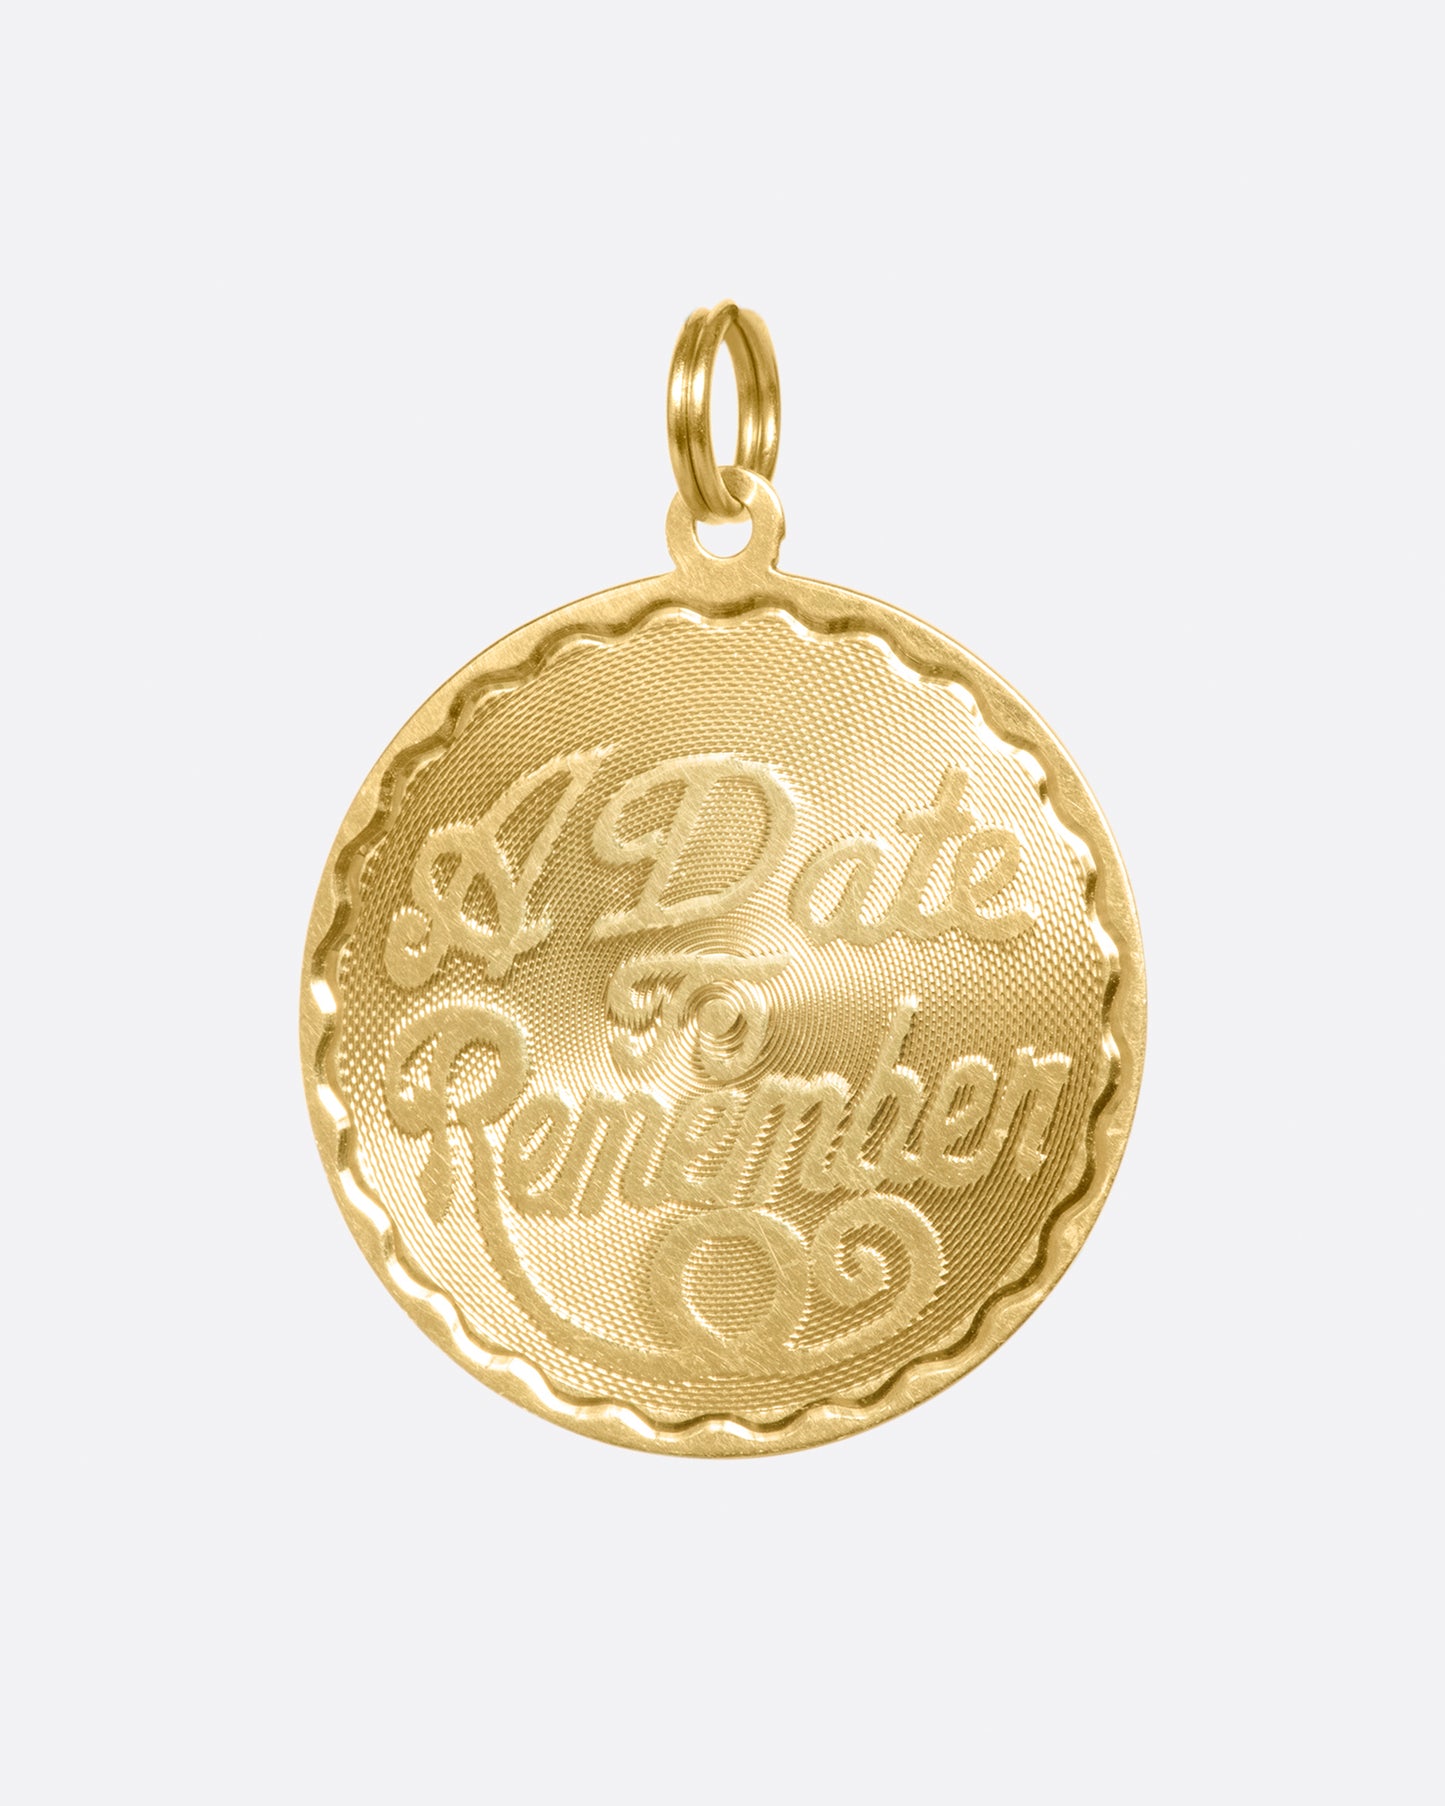 This medallion charm is blank on the back, waiting to be engraved with a date that's important to you.